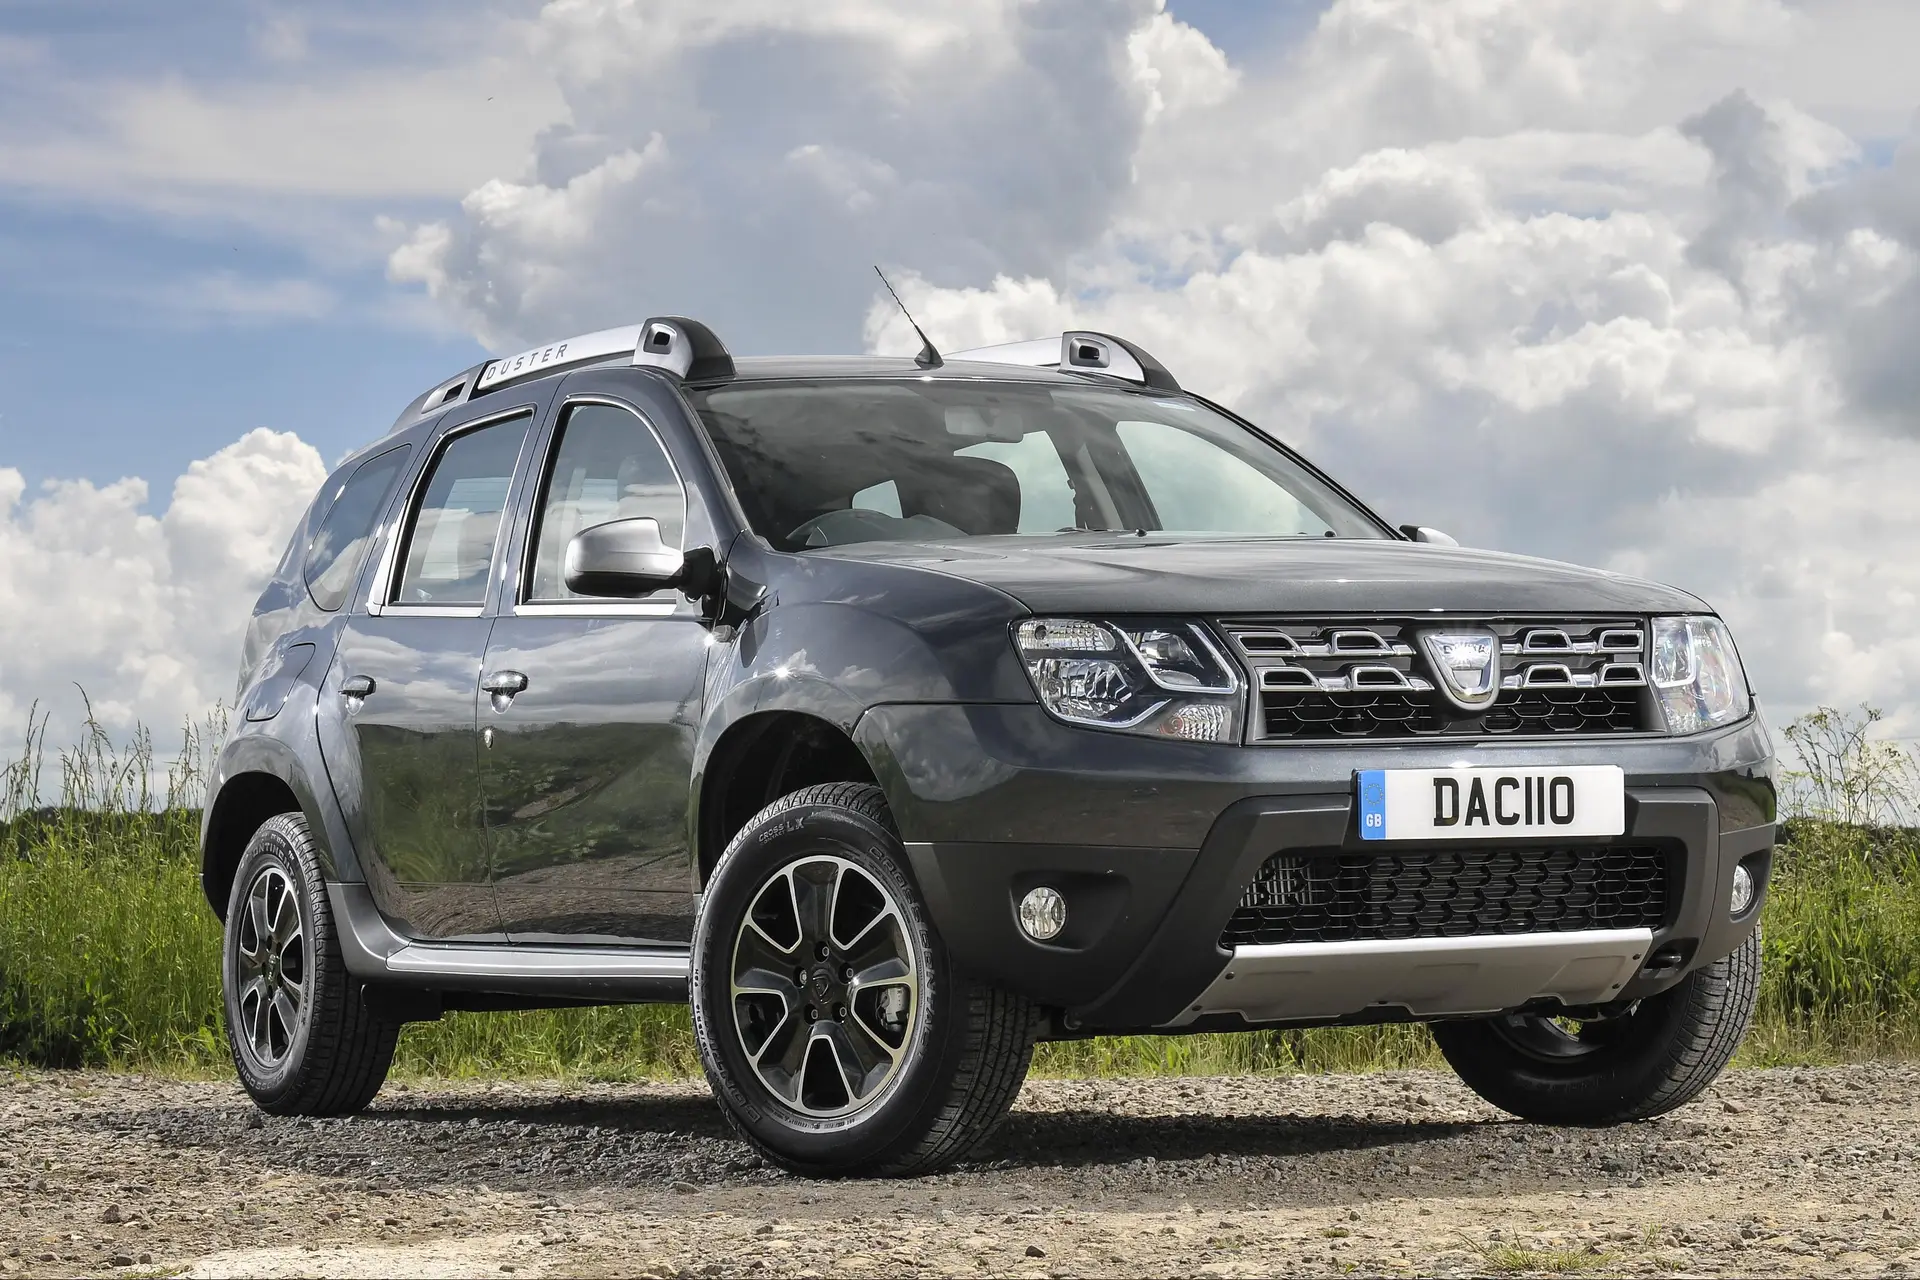 Used Dacia Duster (2012-2018) Review: exterior front three quarter photo of the Dacia Duster